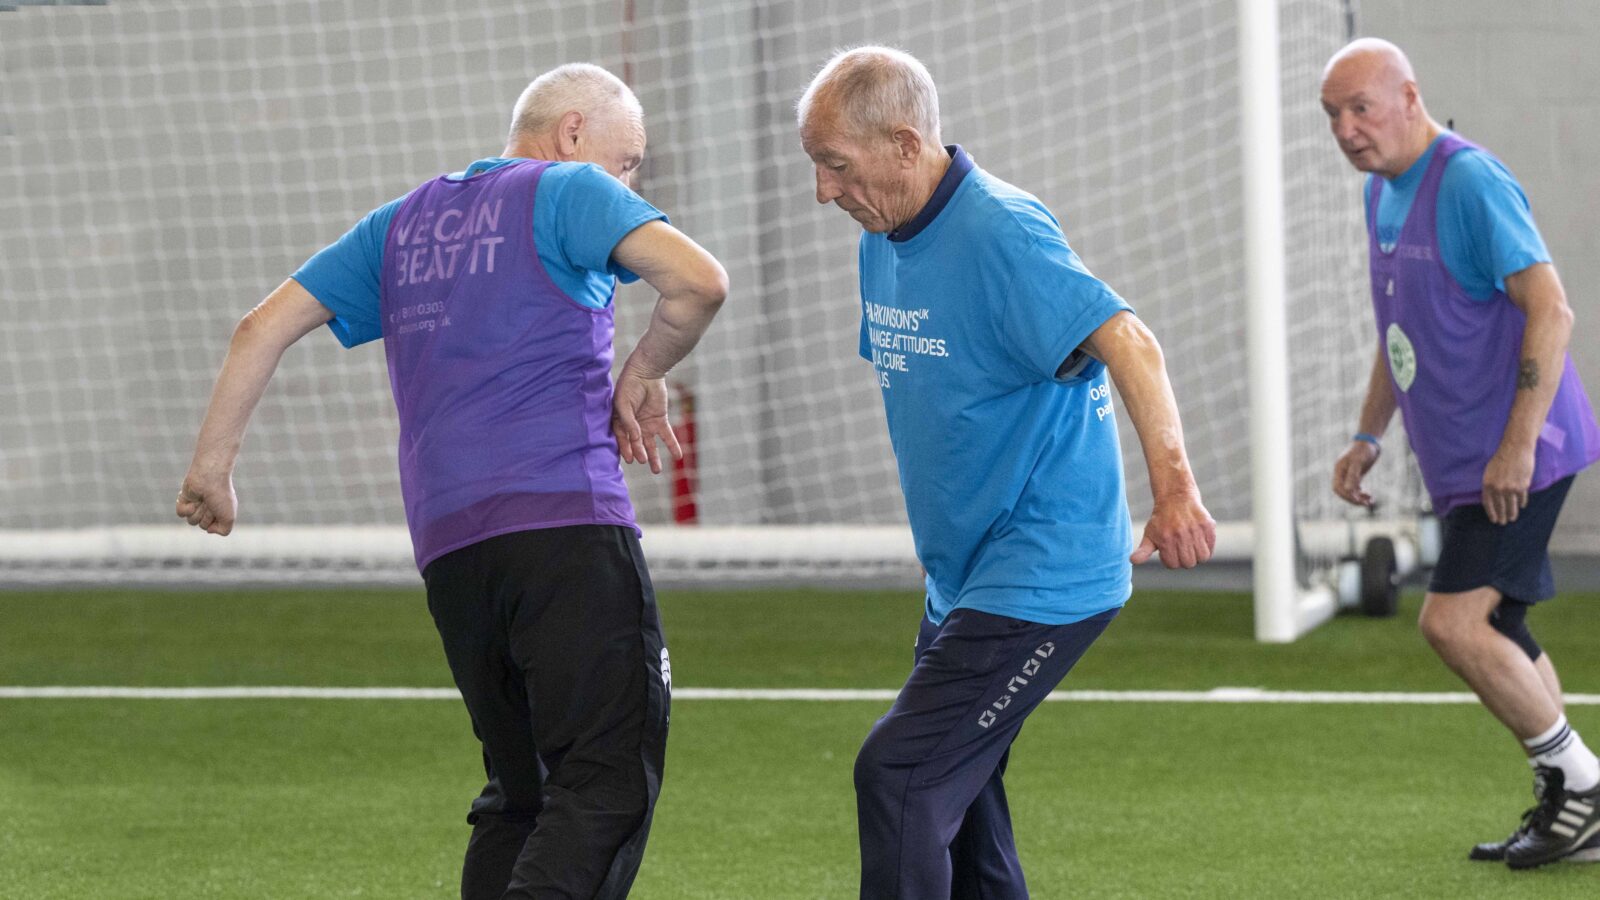 Sport Aberdeen works with partners to introduce new Walking Football for individuals living with Parkinson’s